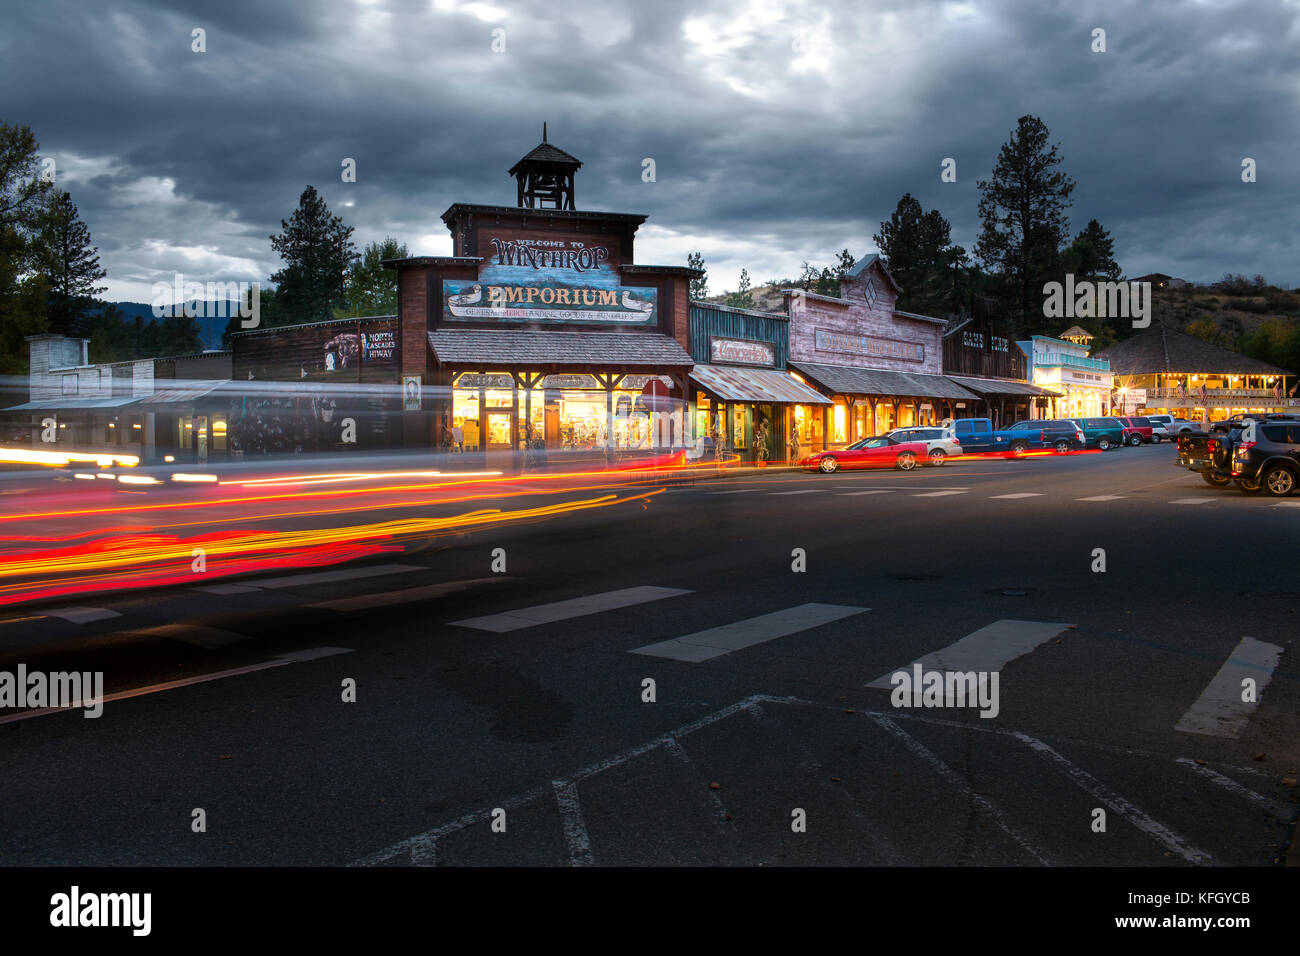 WA14227-00...WASHINGTON - The town of Winthorp on the east side of the North Cascades along Highway 20. Stock Photo